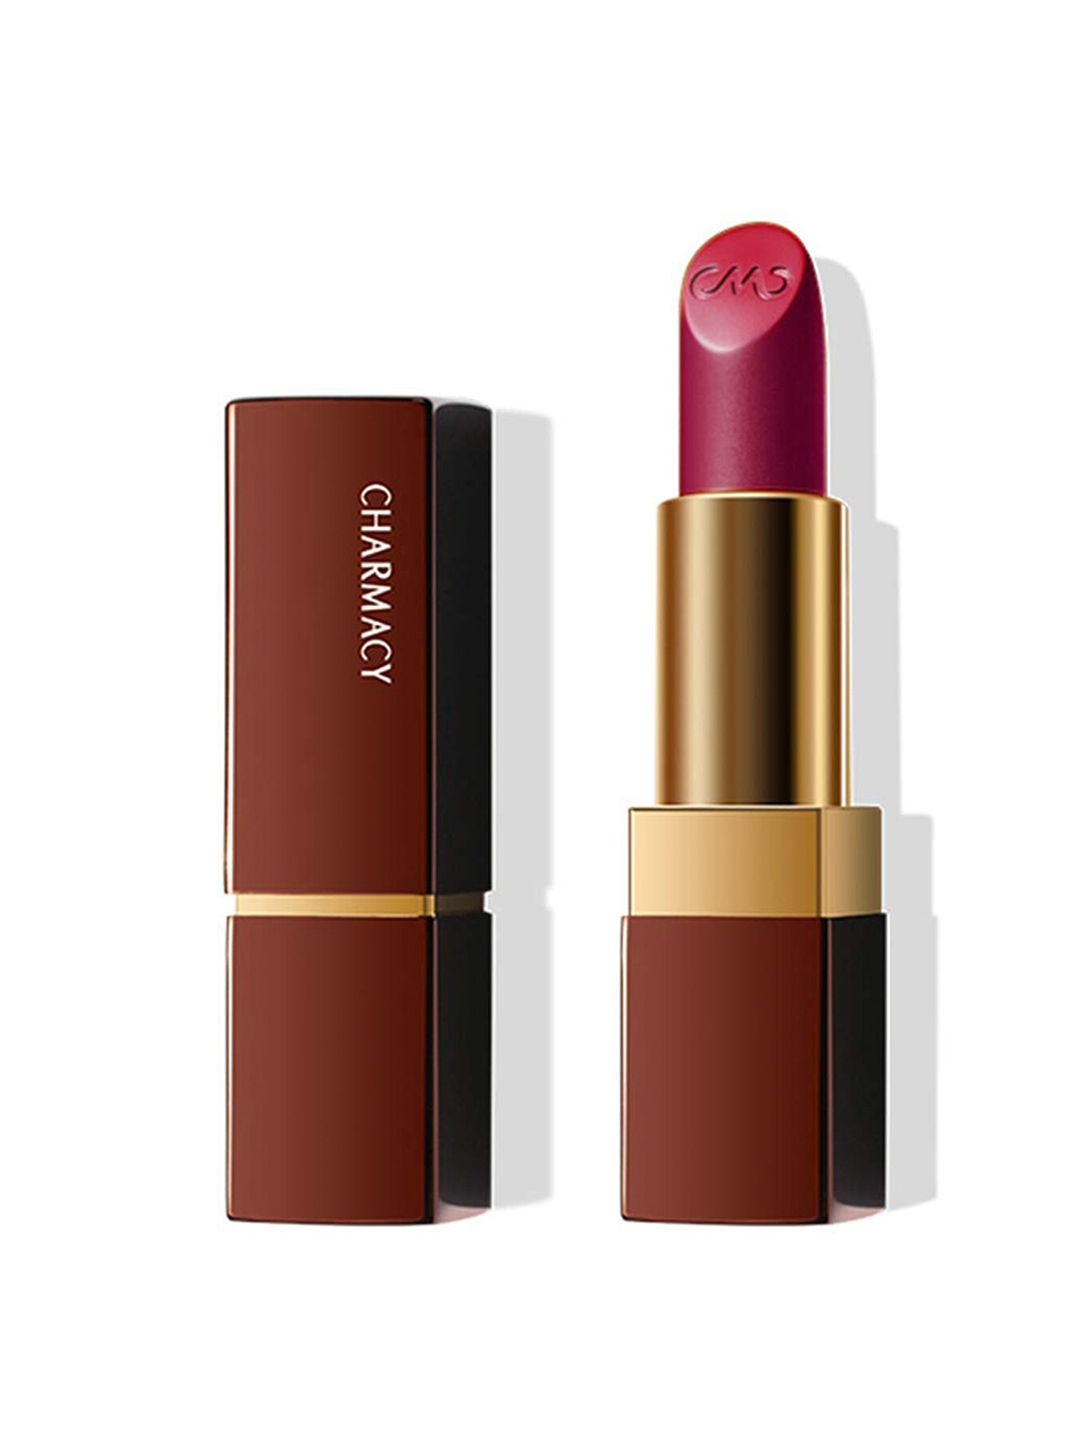 Charmacy Milano Pink Frost Bite Soft Satin Matte Lipstick Price in India